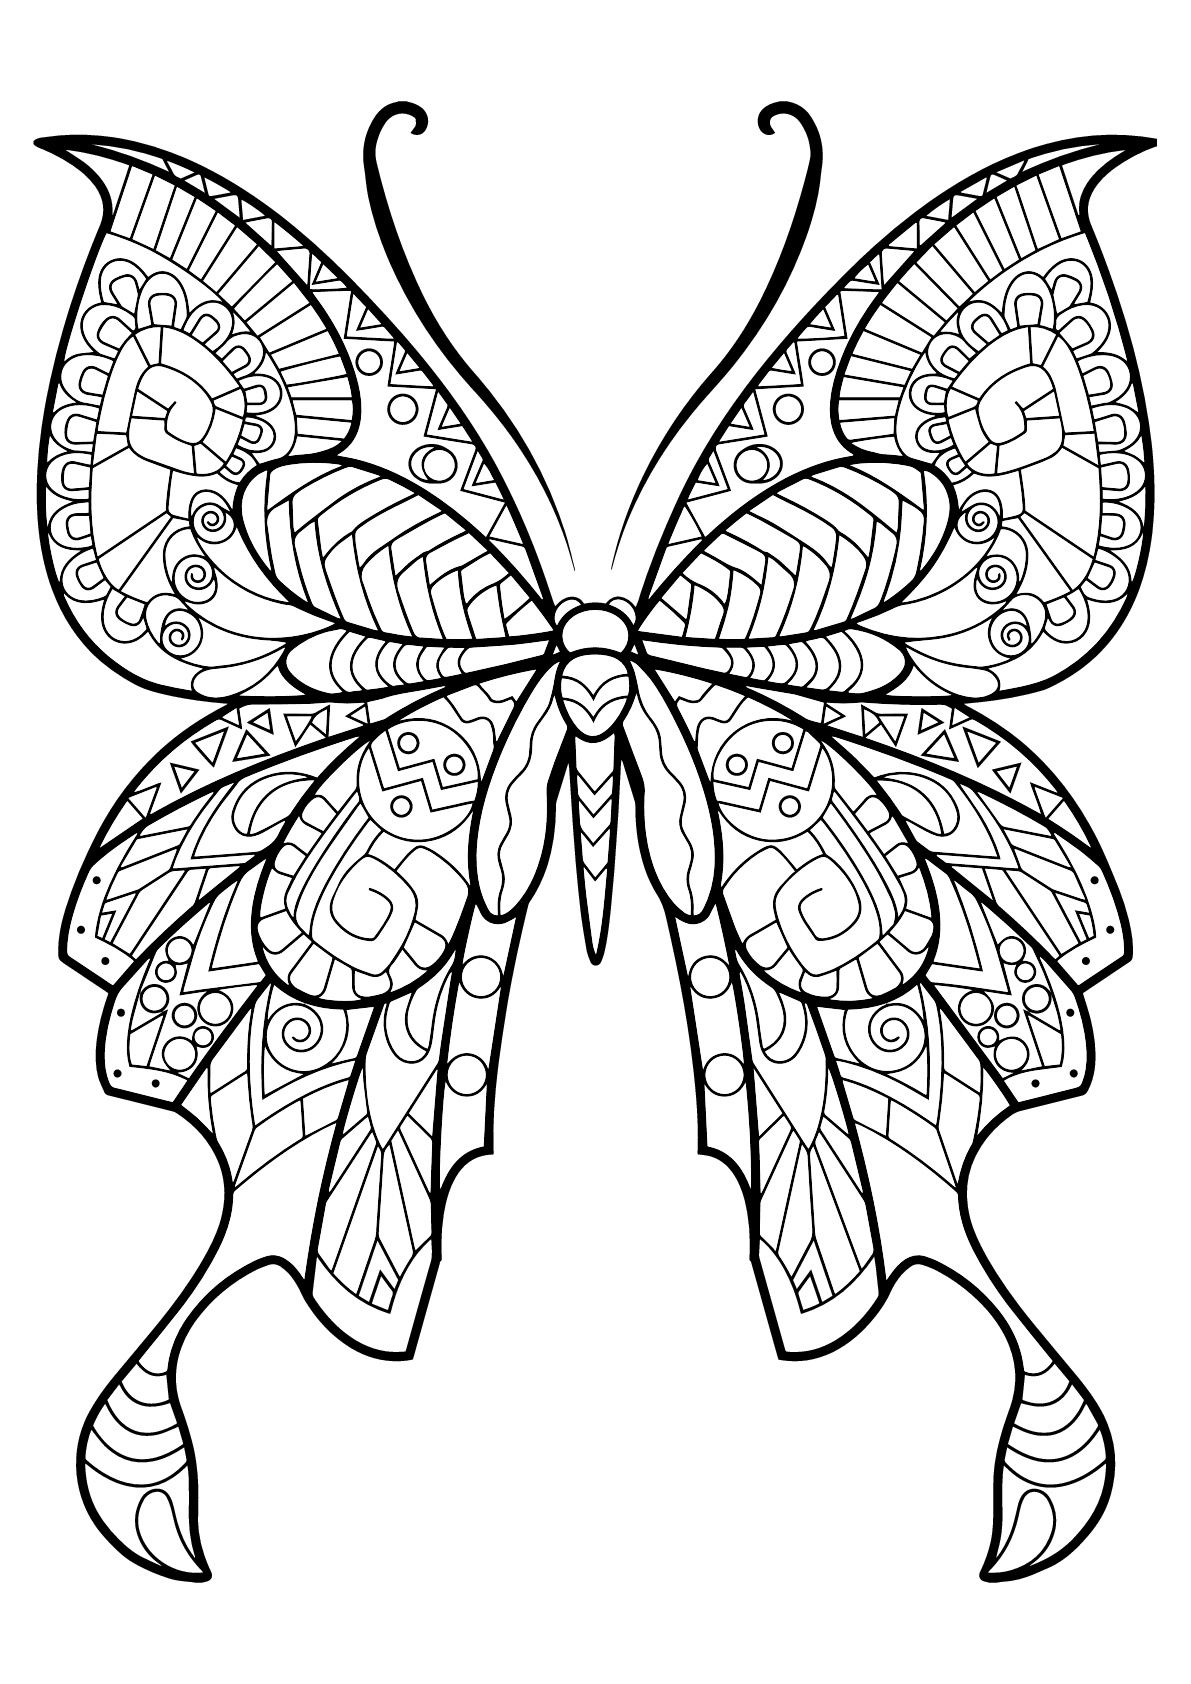 Butterfly beautiful patterns - 8 - Butterflies & insects Adult Coloring